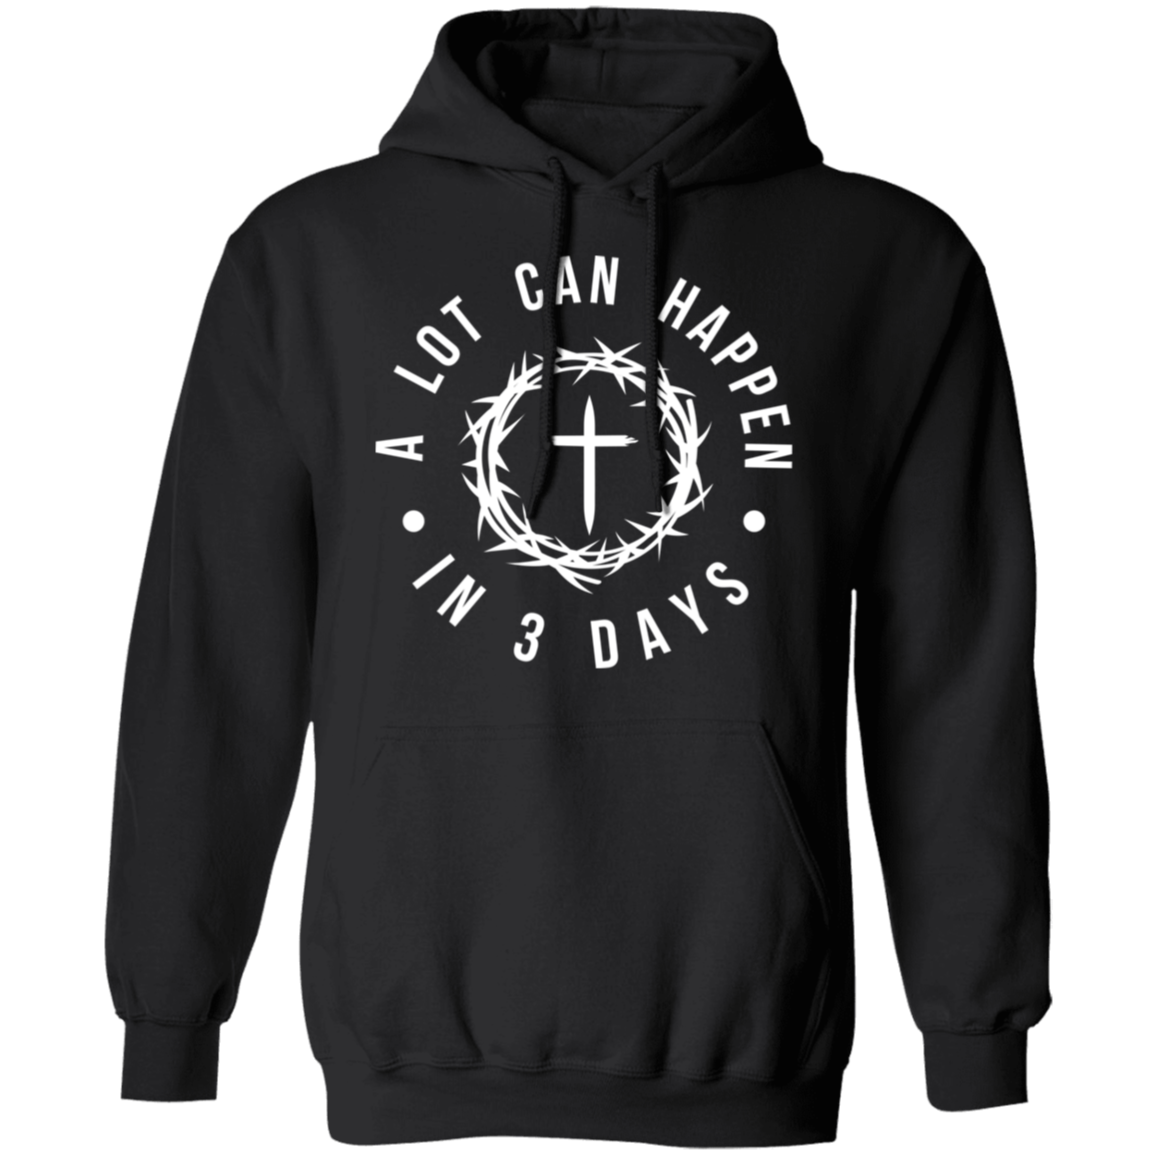 A lot can happen in 3 Days, Resurrection, Jesus, Savior, Faith - Unisex Pullover Hoodie